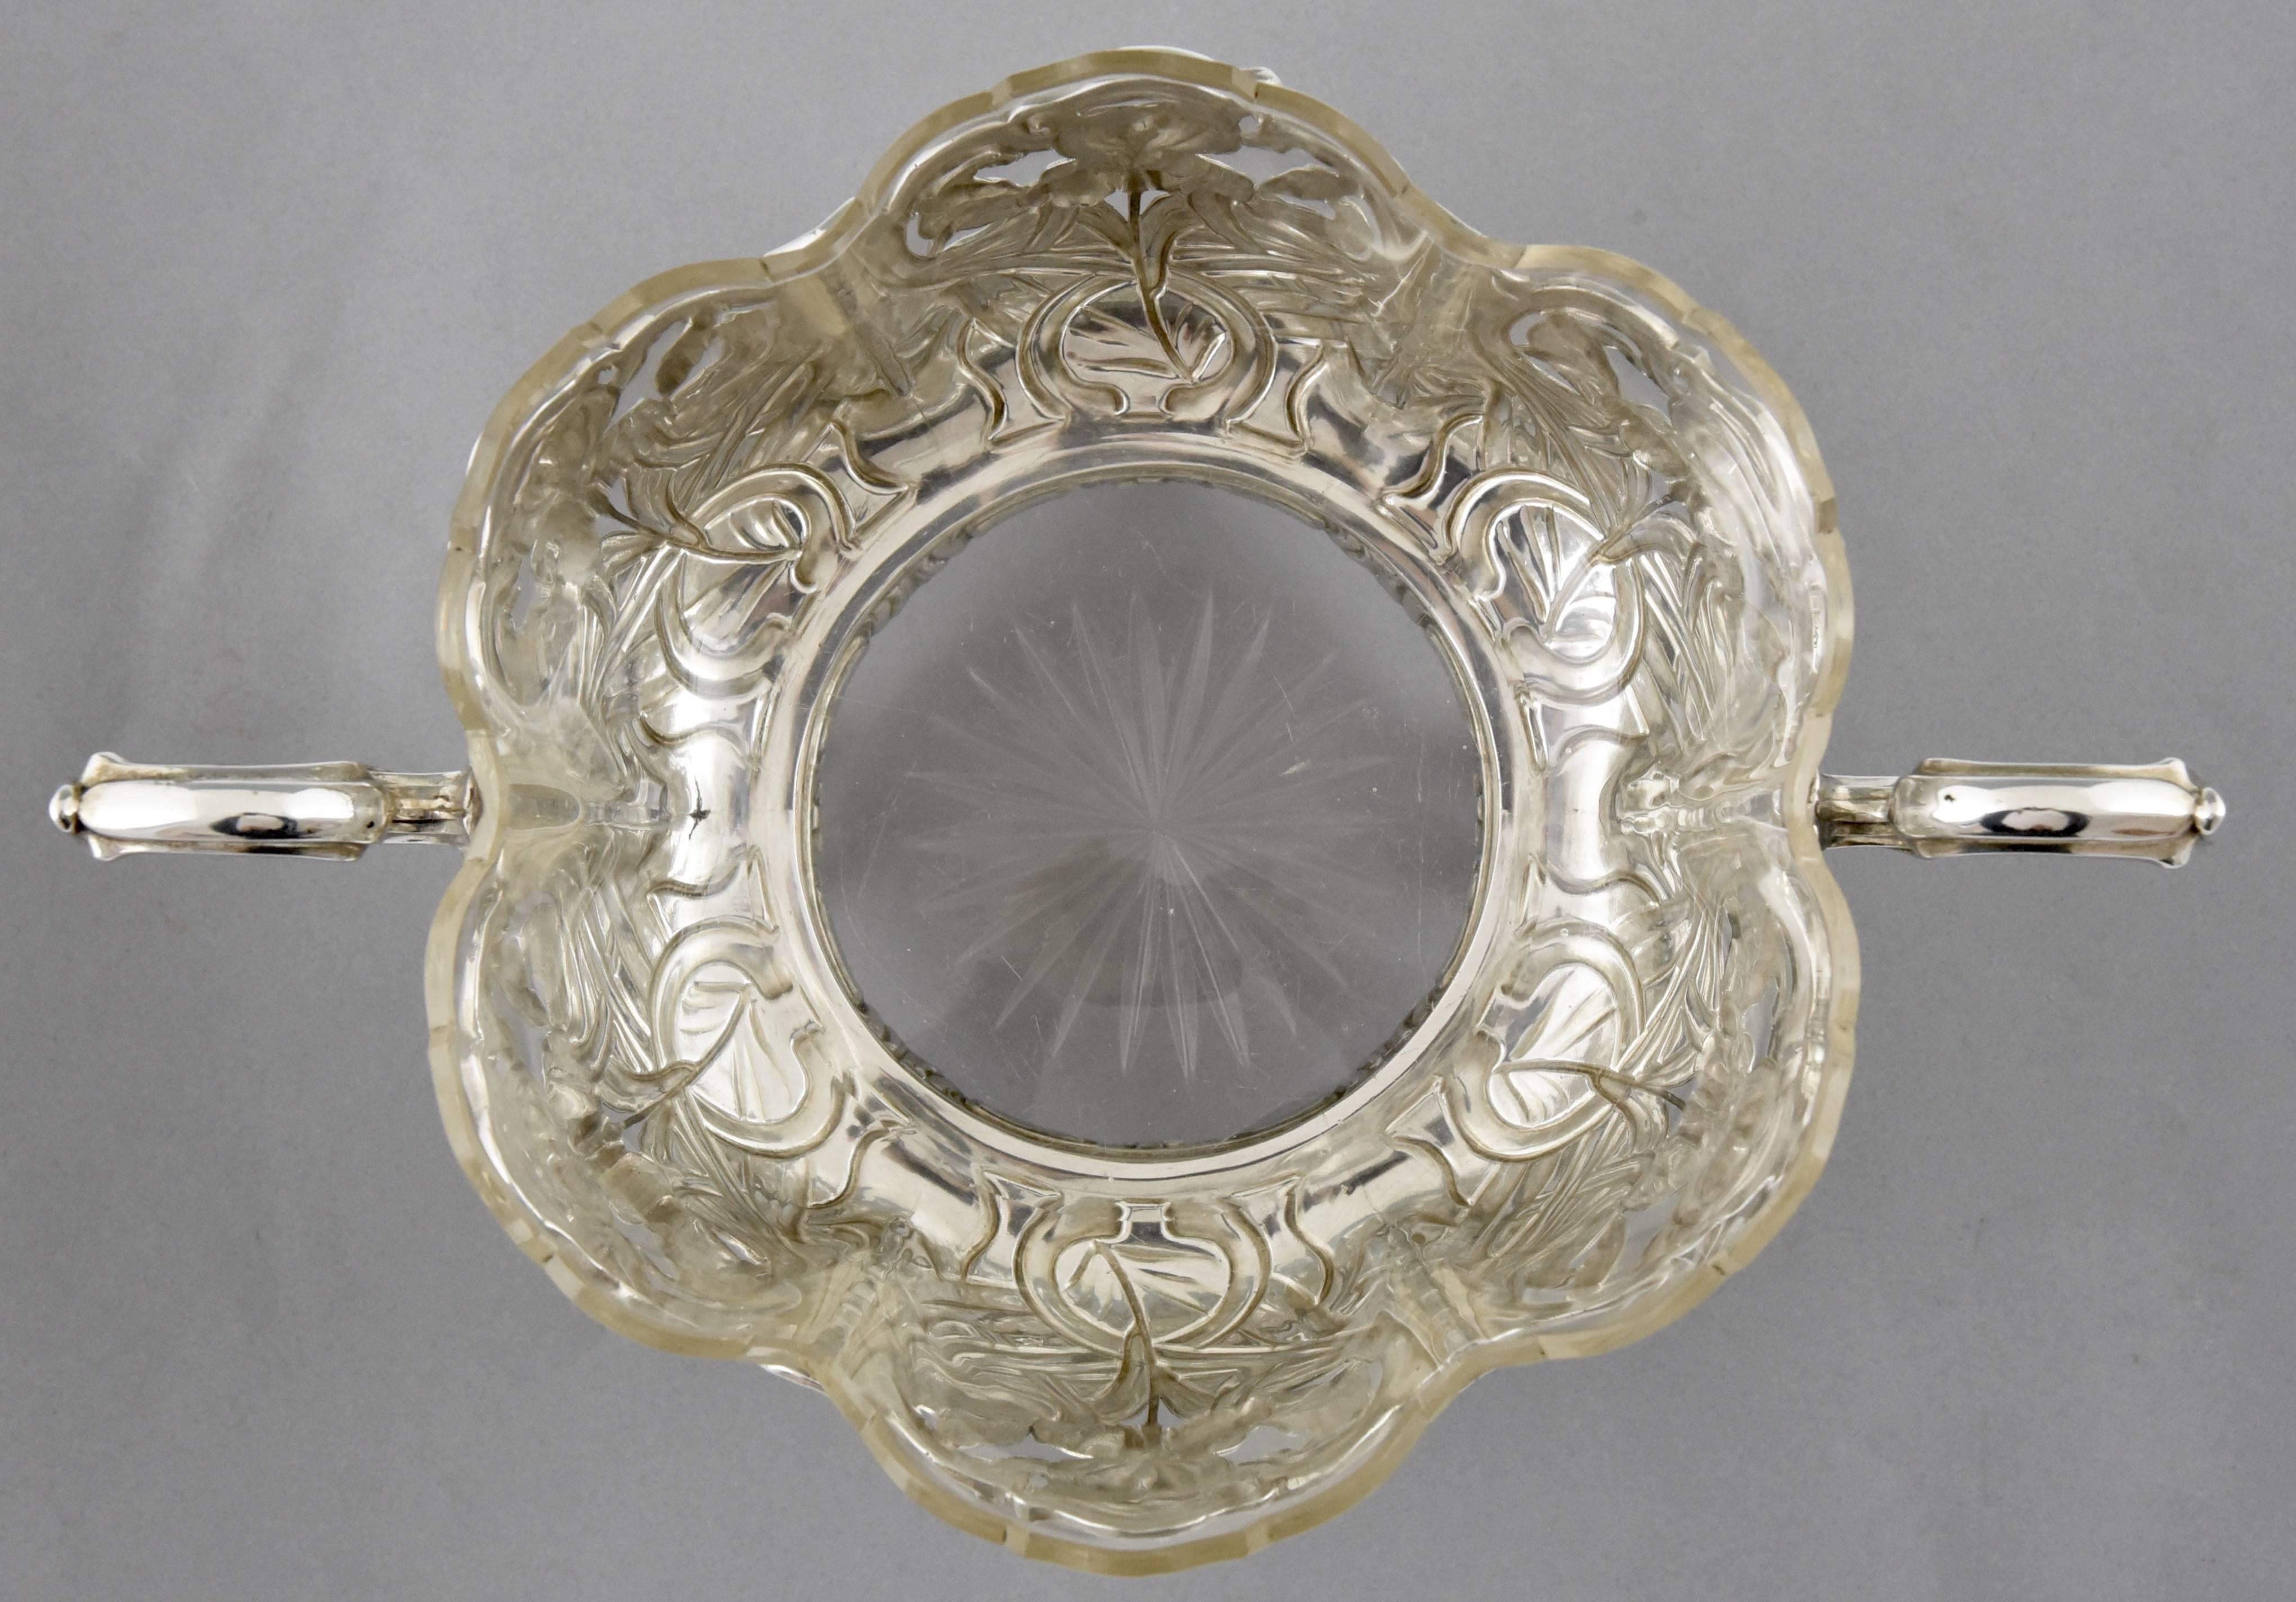 German Art Nouveau silver flower dish with glass liner by A. Strobl, 1900. 3